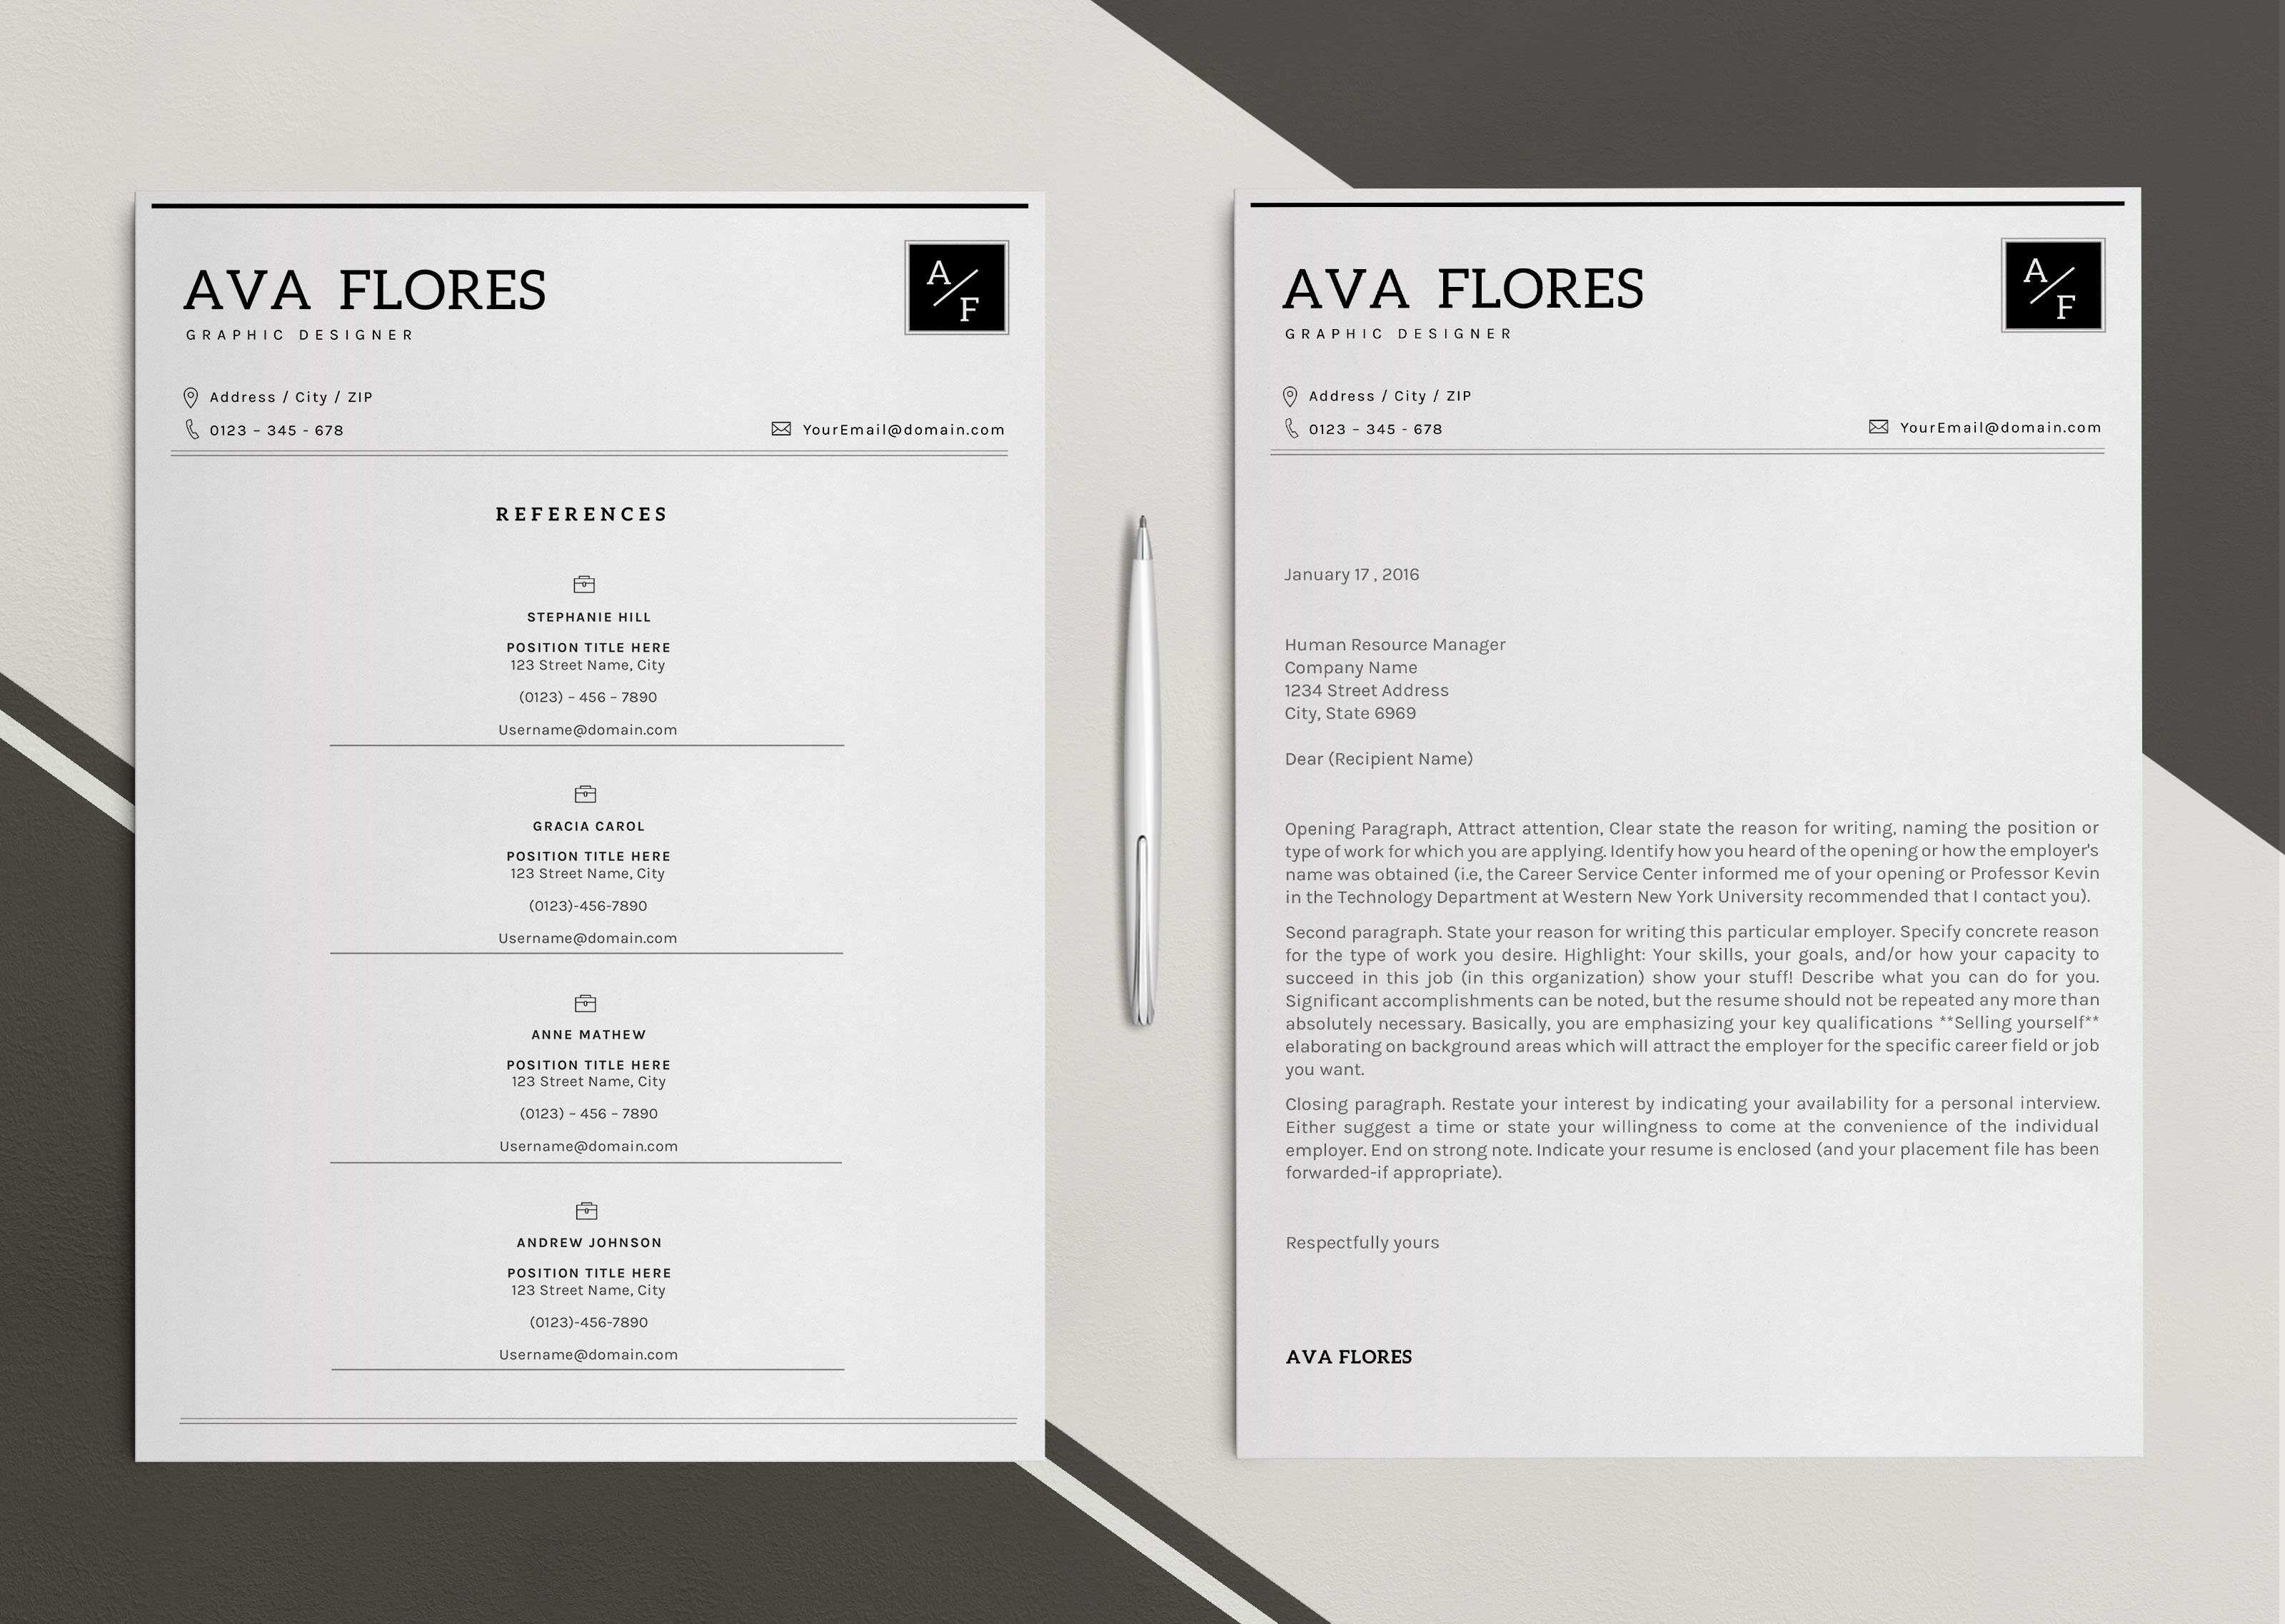 Clear Resume/CV Template-11 preview image.